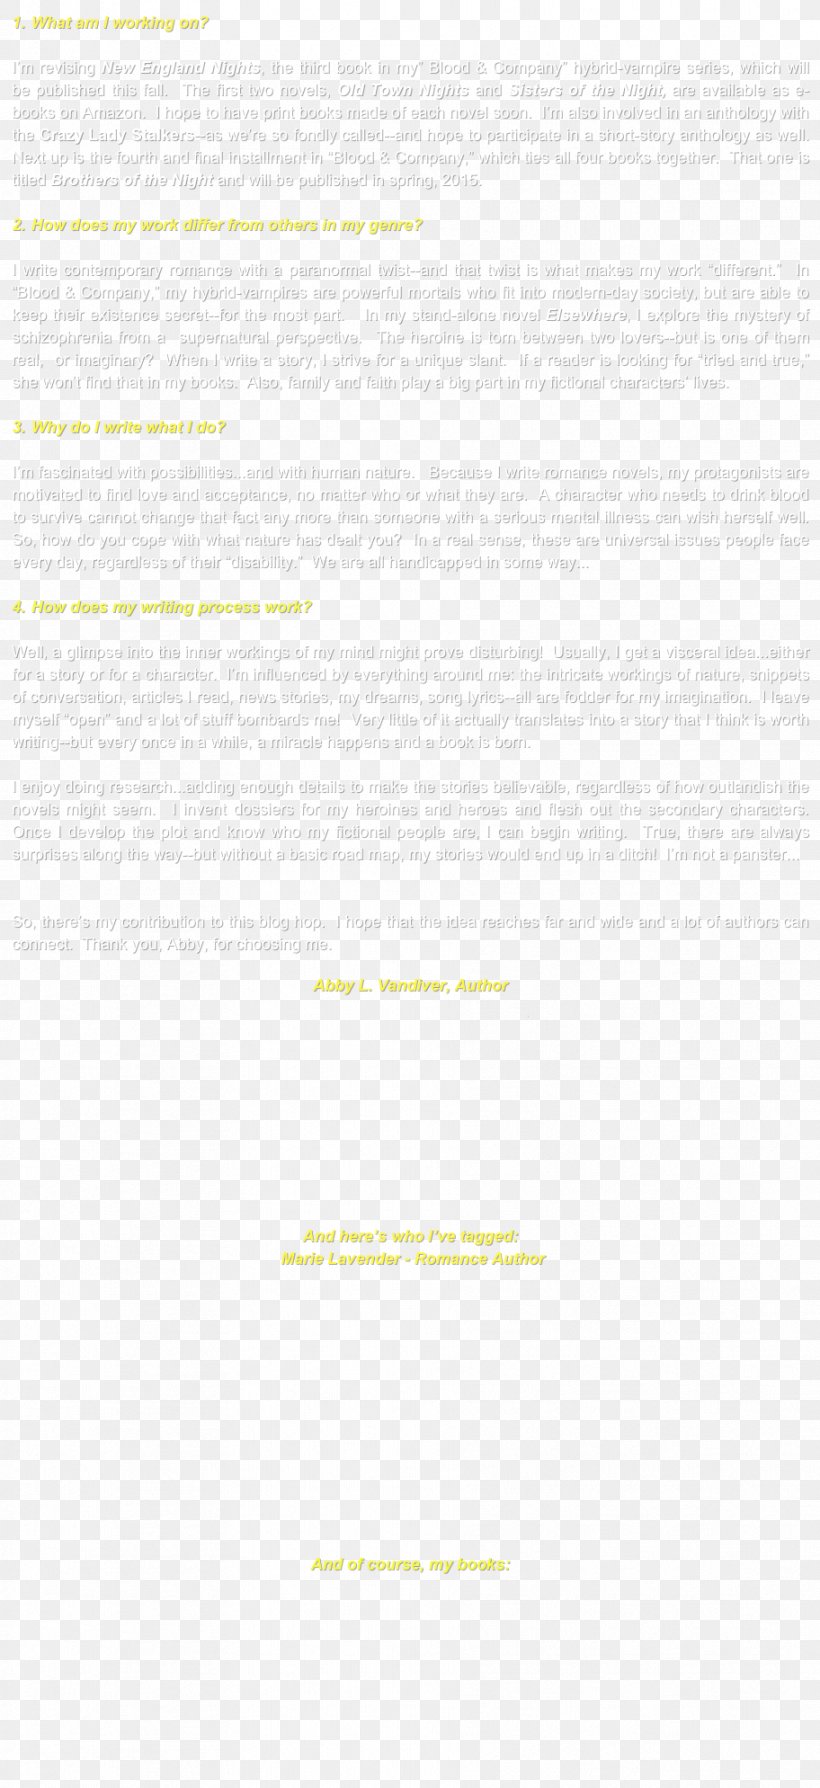 Discovery Of Achilles On Skyros Document, PNG, 912x1989px, Achilles On Skyros, Achilles, Area, Discovery Of Achilles On Skyros, Document Download Free